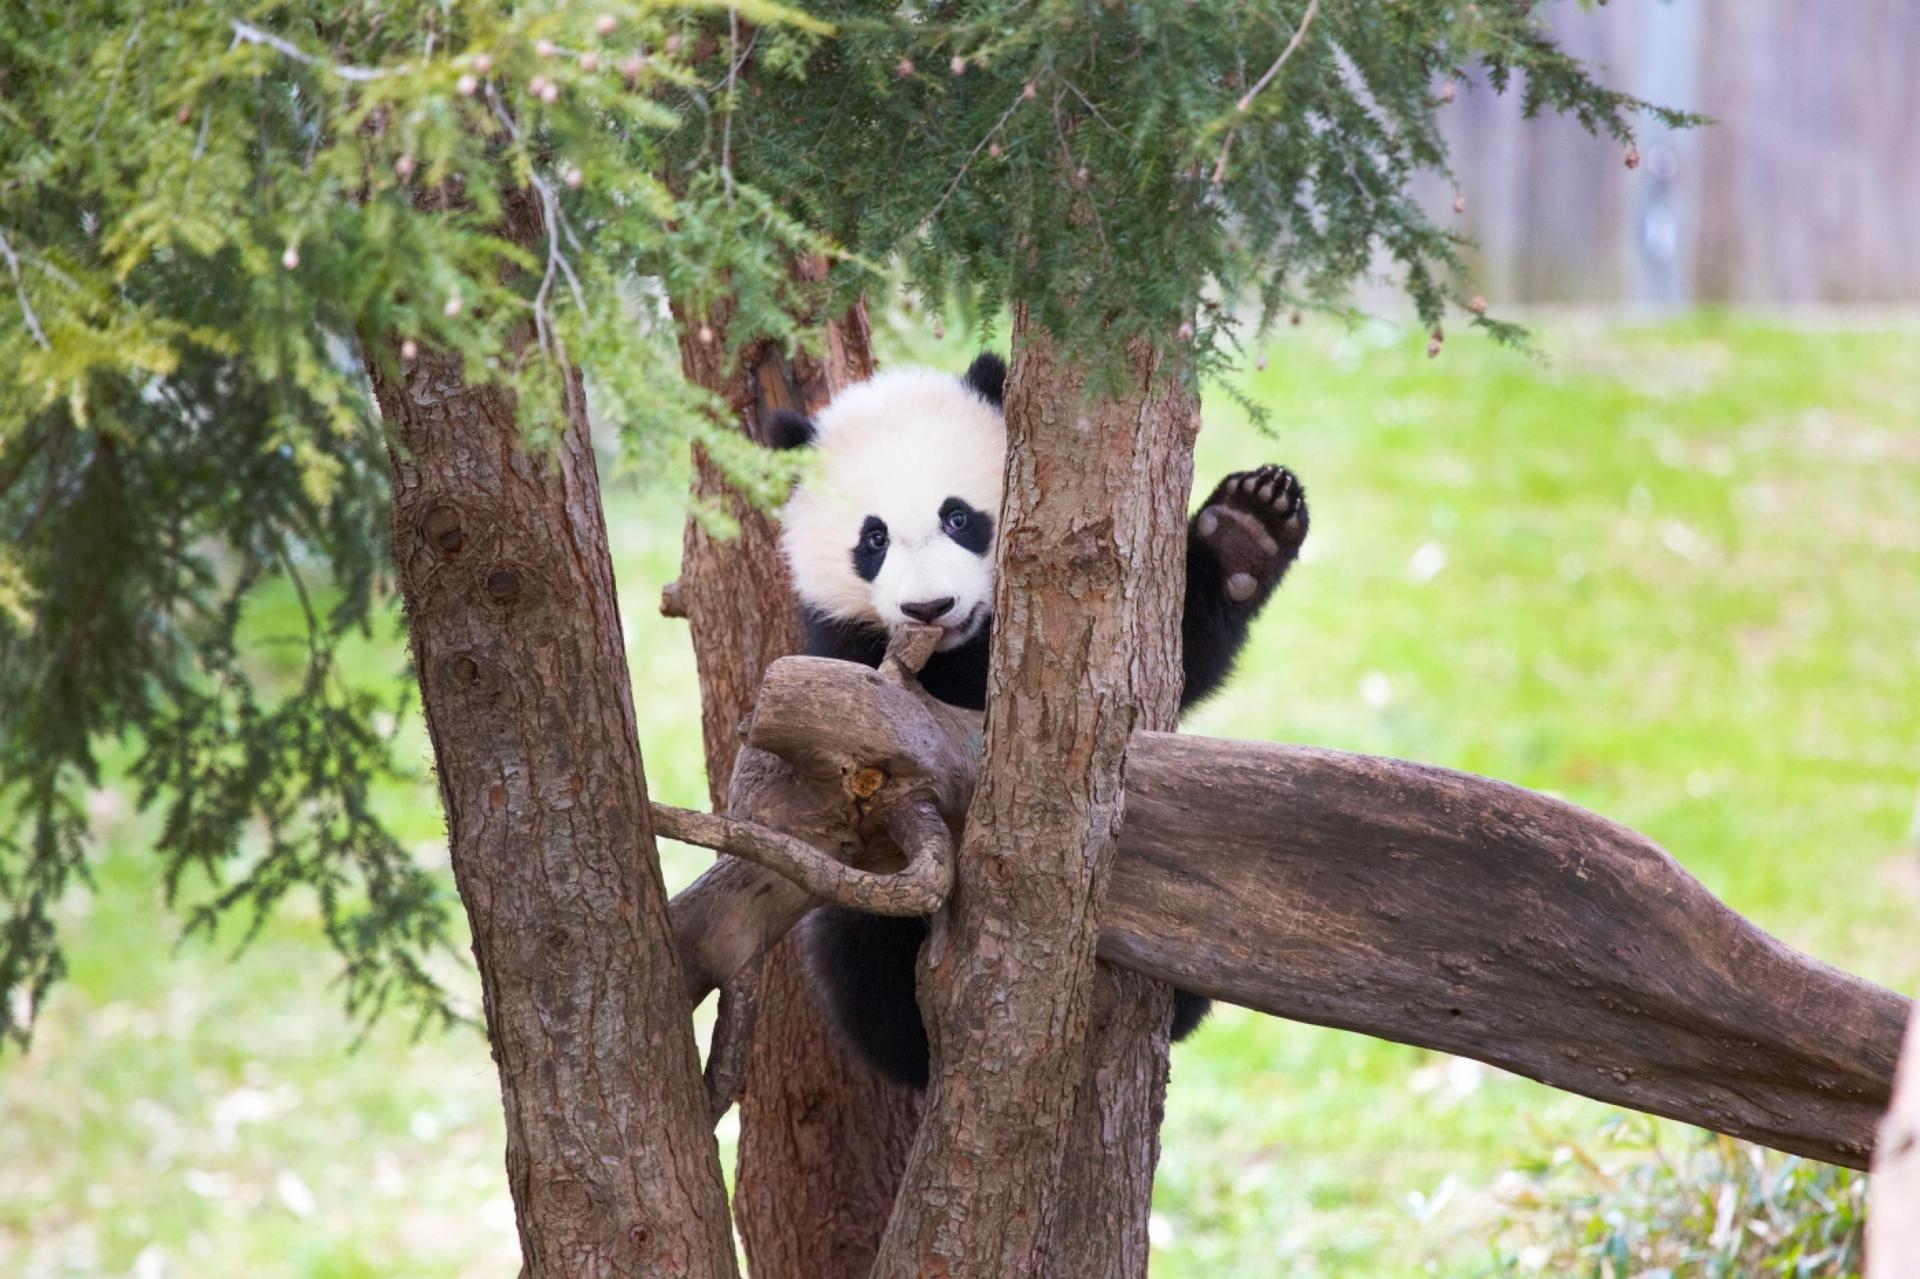 Black and white panda in a tree and waves his paw like he's waving goodbye 